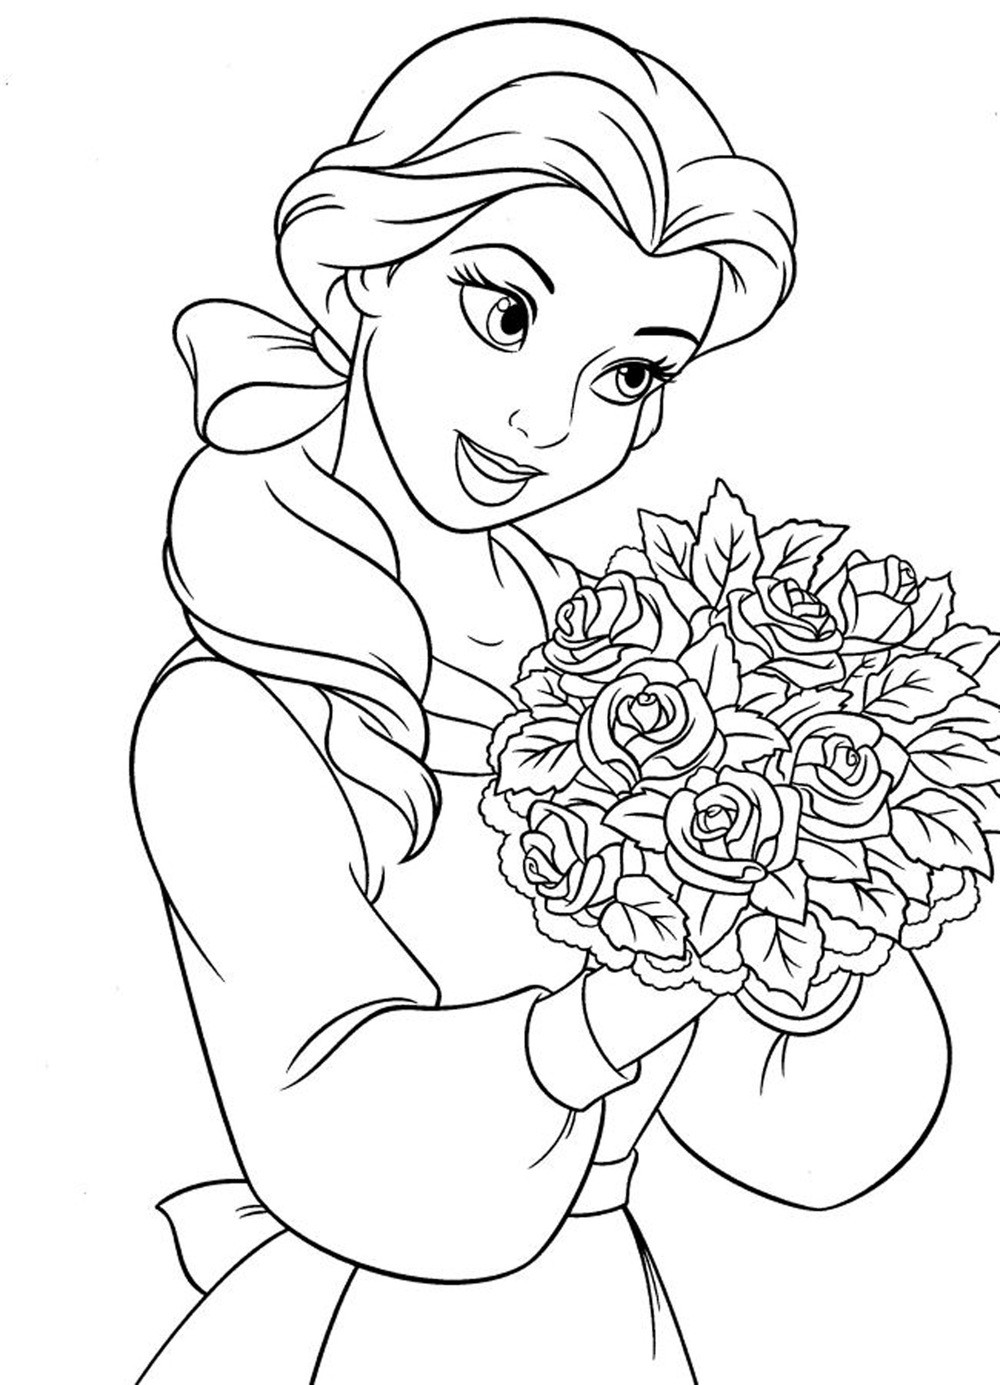 Princess Coloring Pages For Boys
 Free Printable Disney Princess Coloring Pages For Kids